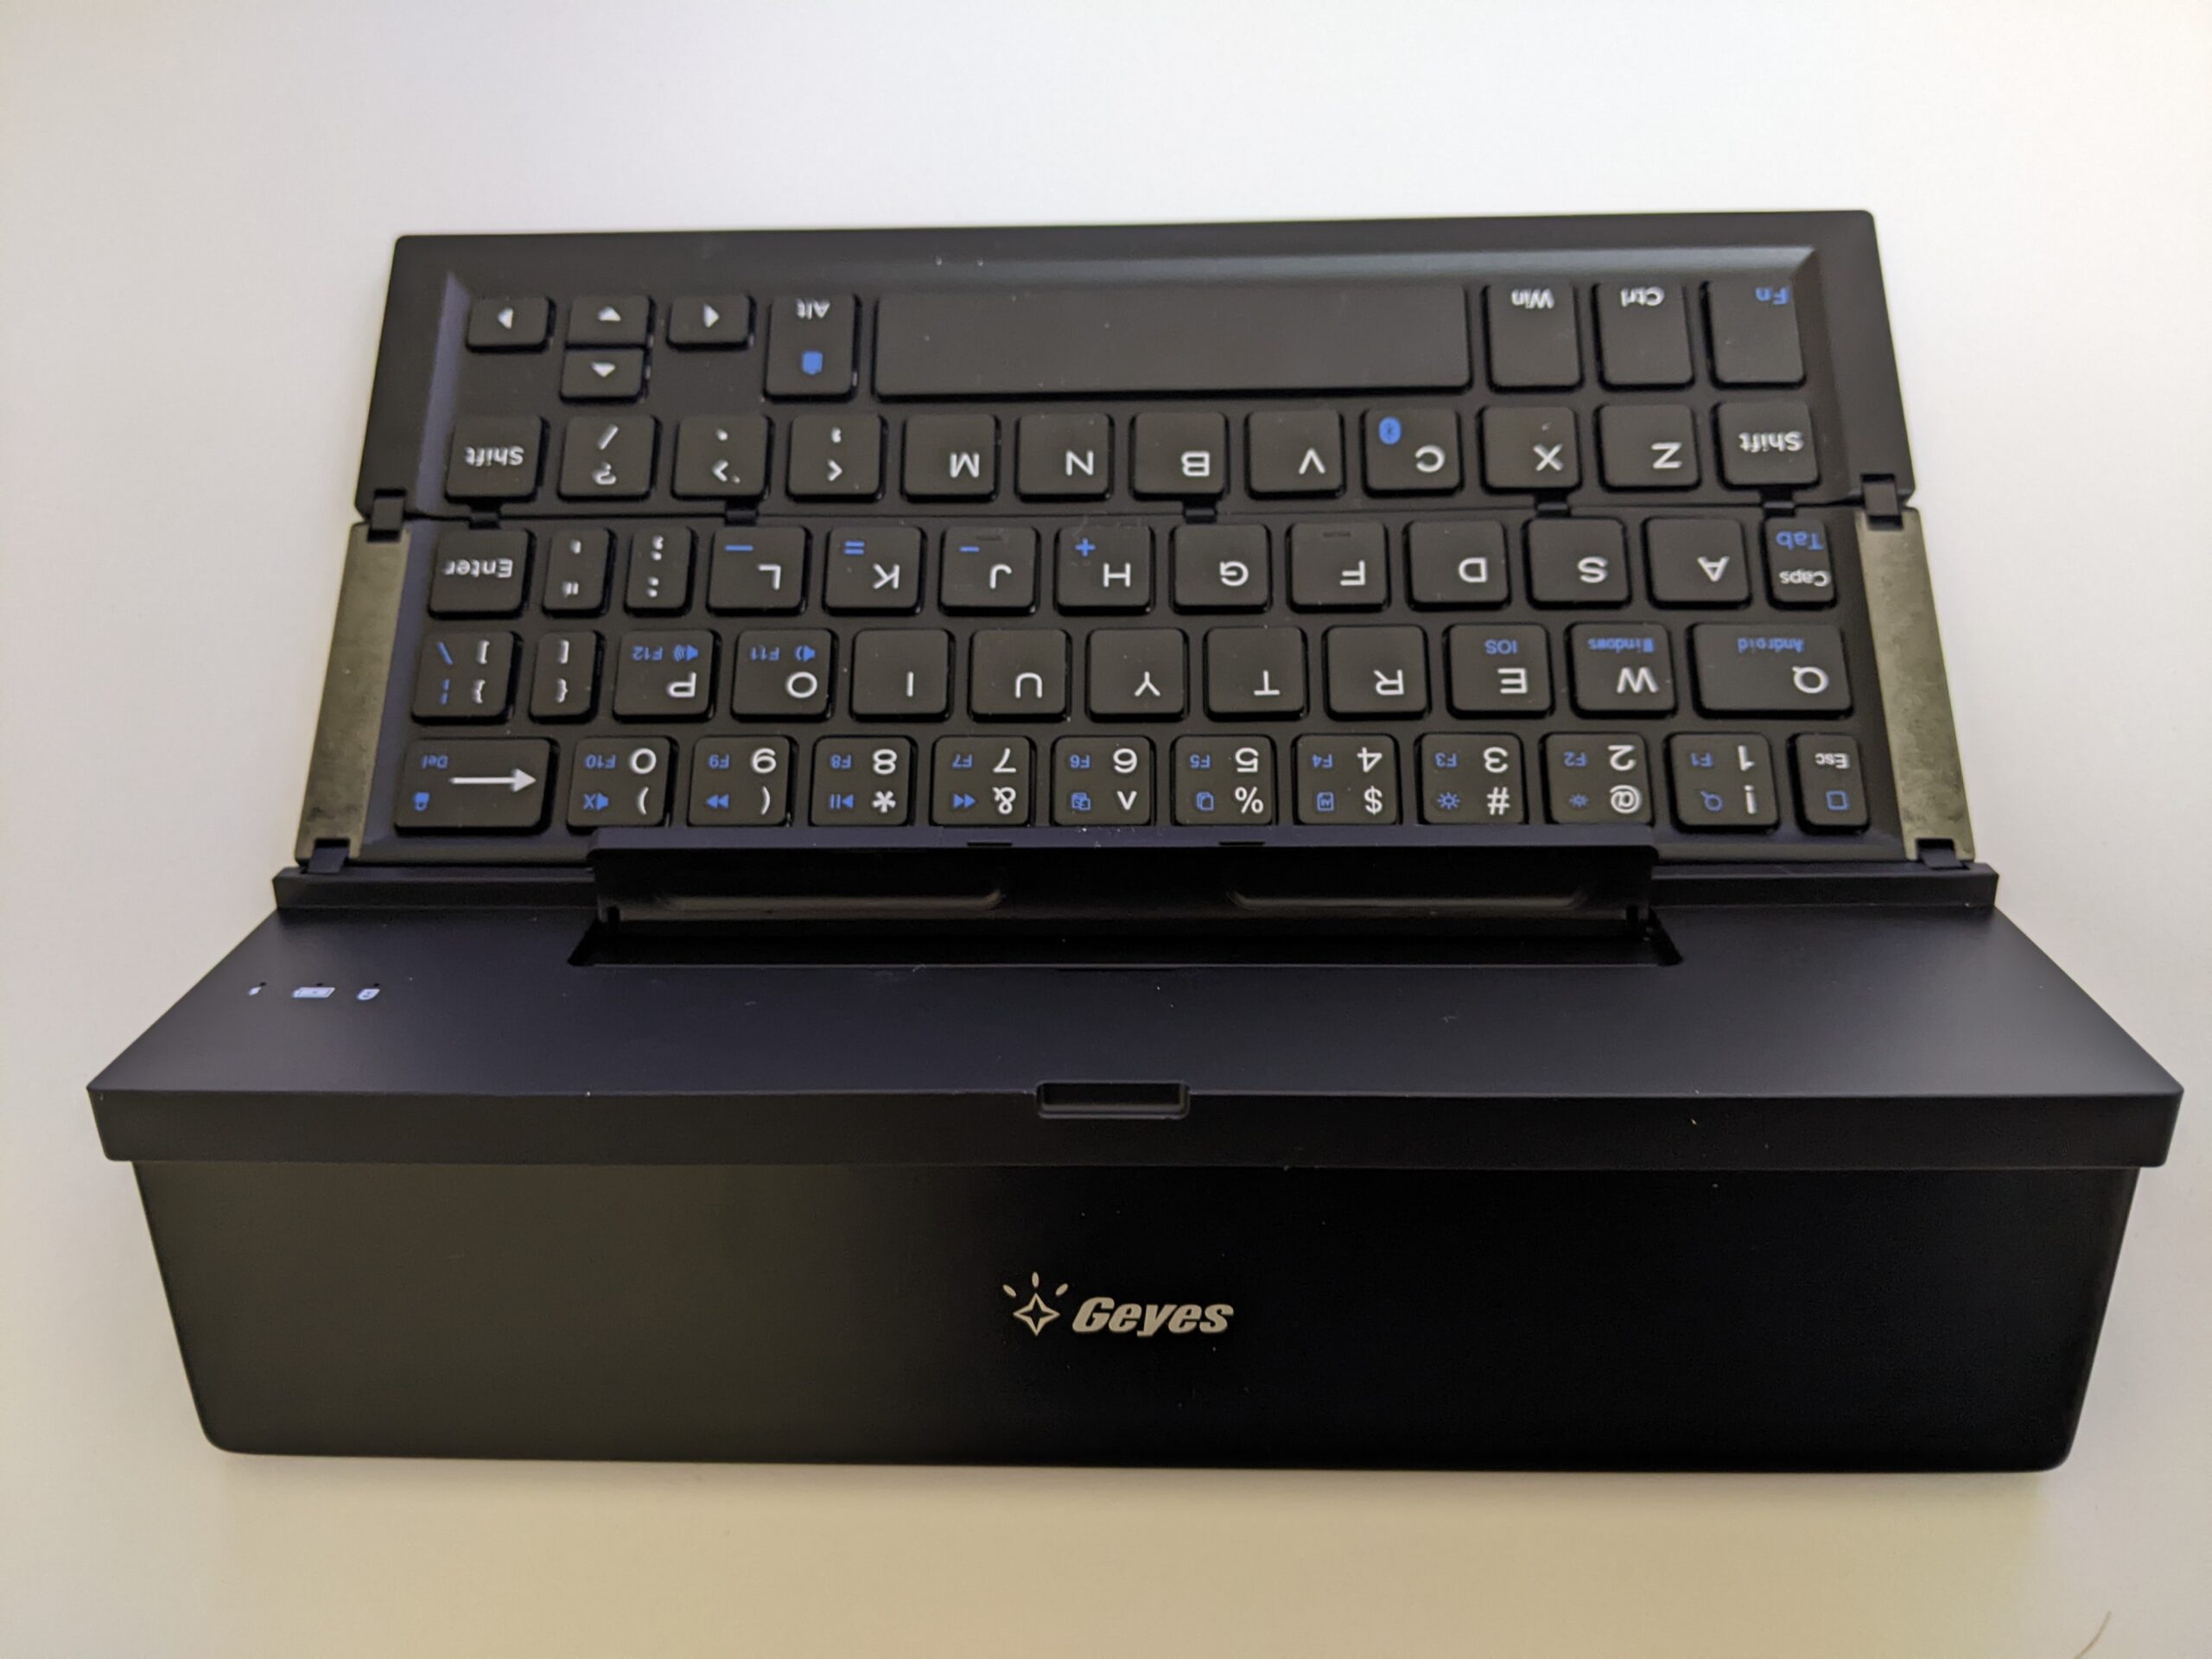 Geyes mini keyboard fully opened with kickstand extended